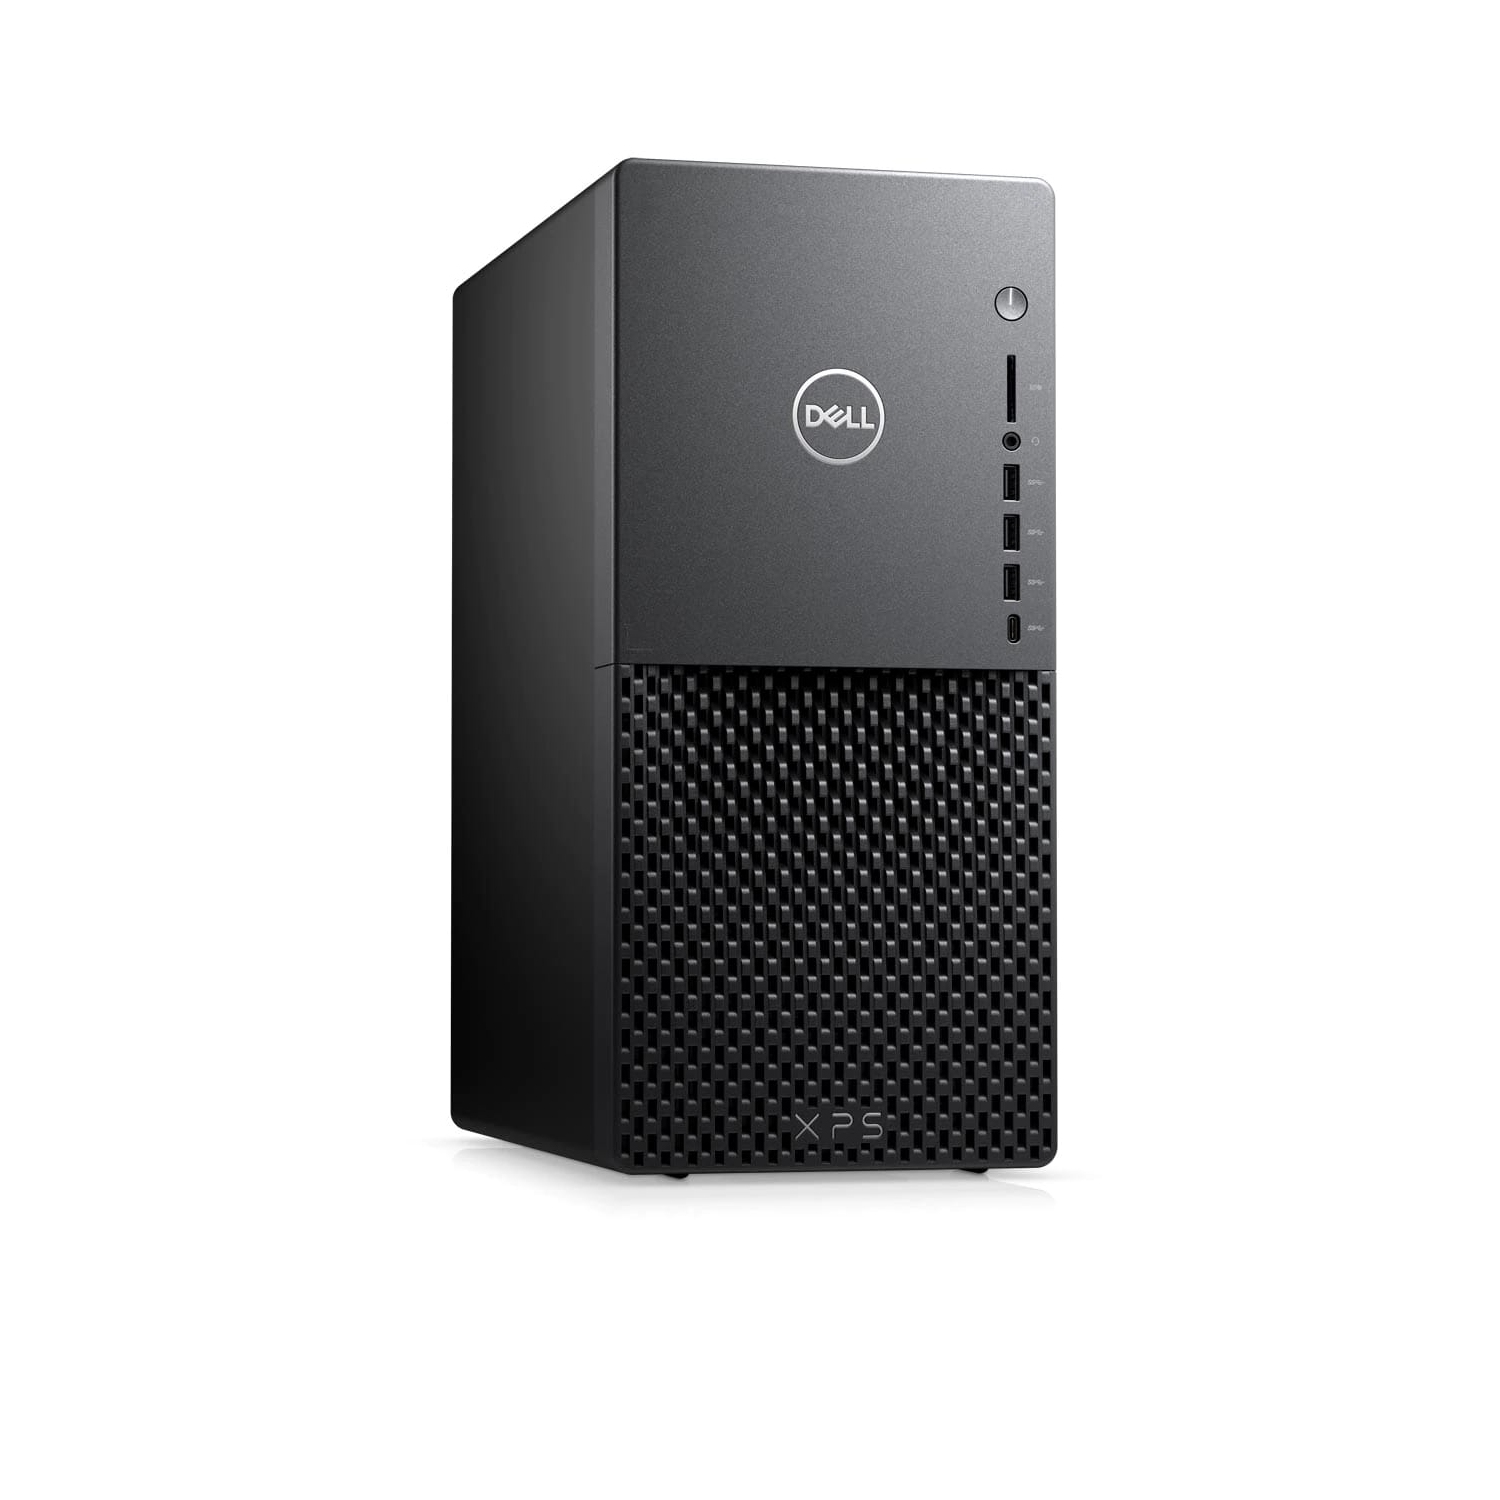 Refurbished (Excellent) - Dell XPS 8940 Desktop (2020) | Core i7 - 1TB SSD - 16GB RAM | 8 Cores @ 4.9 GHz - 11th Gen CPU Certified Refurbished